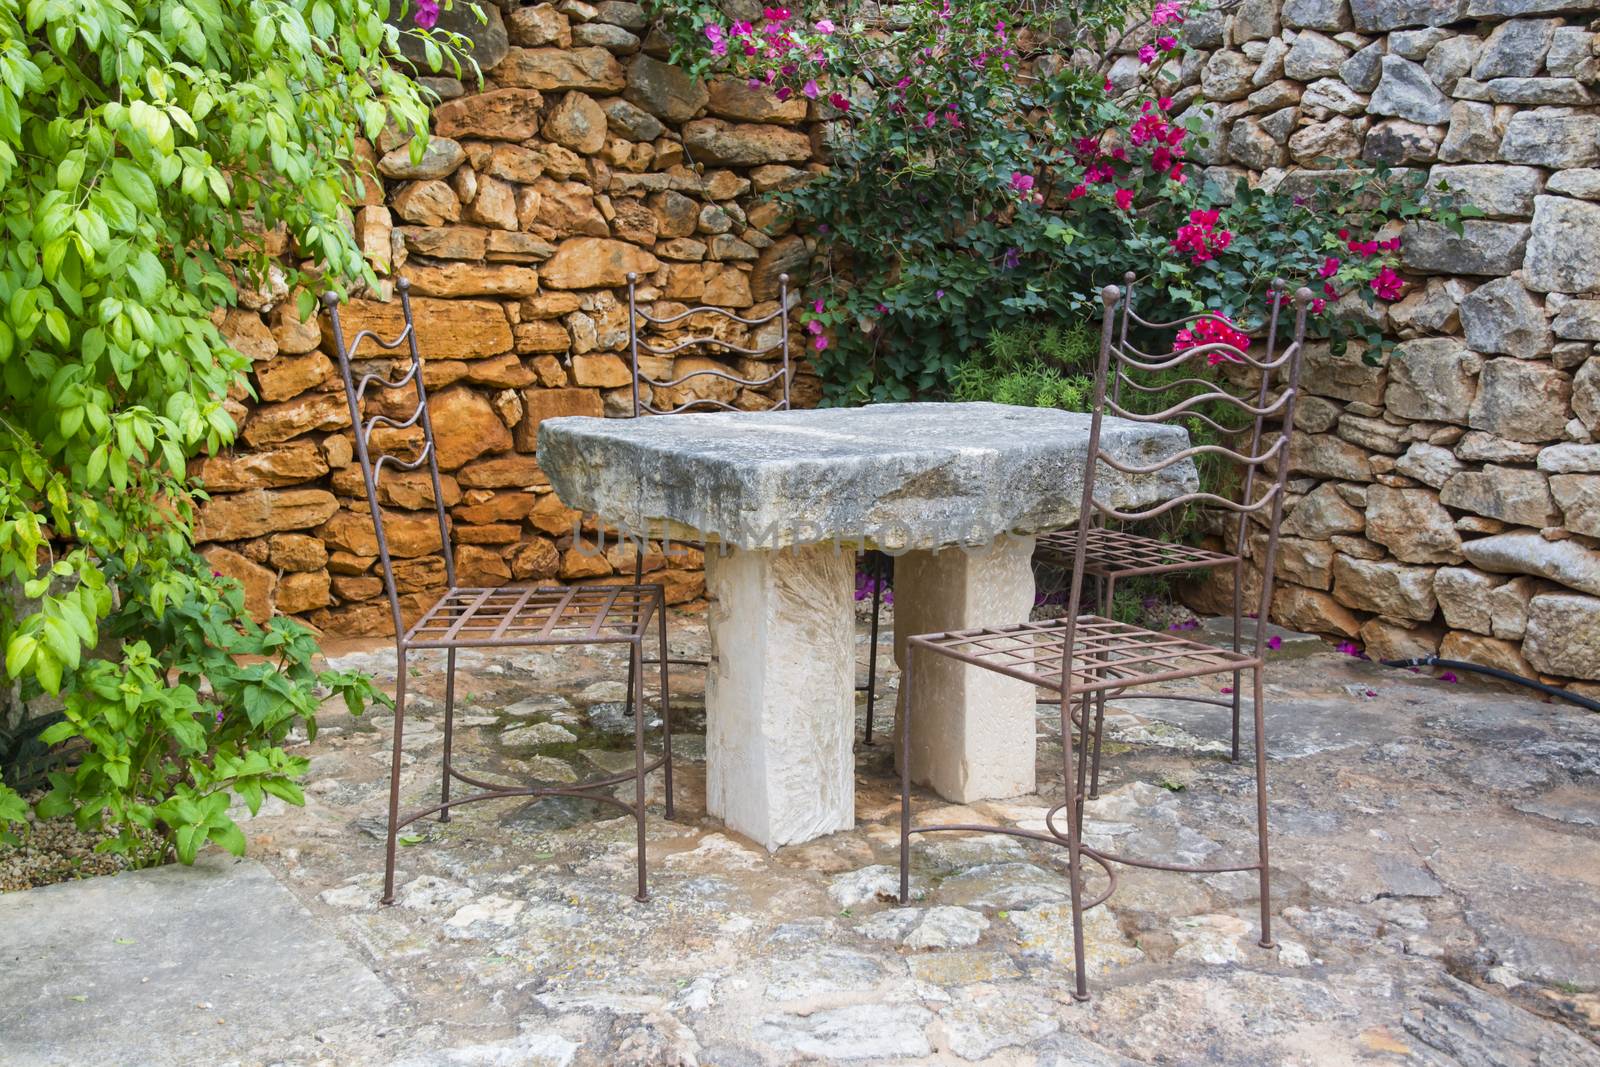 Garden Stone Table with wrought iron chairs, plants and drystone wall.